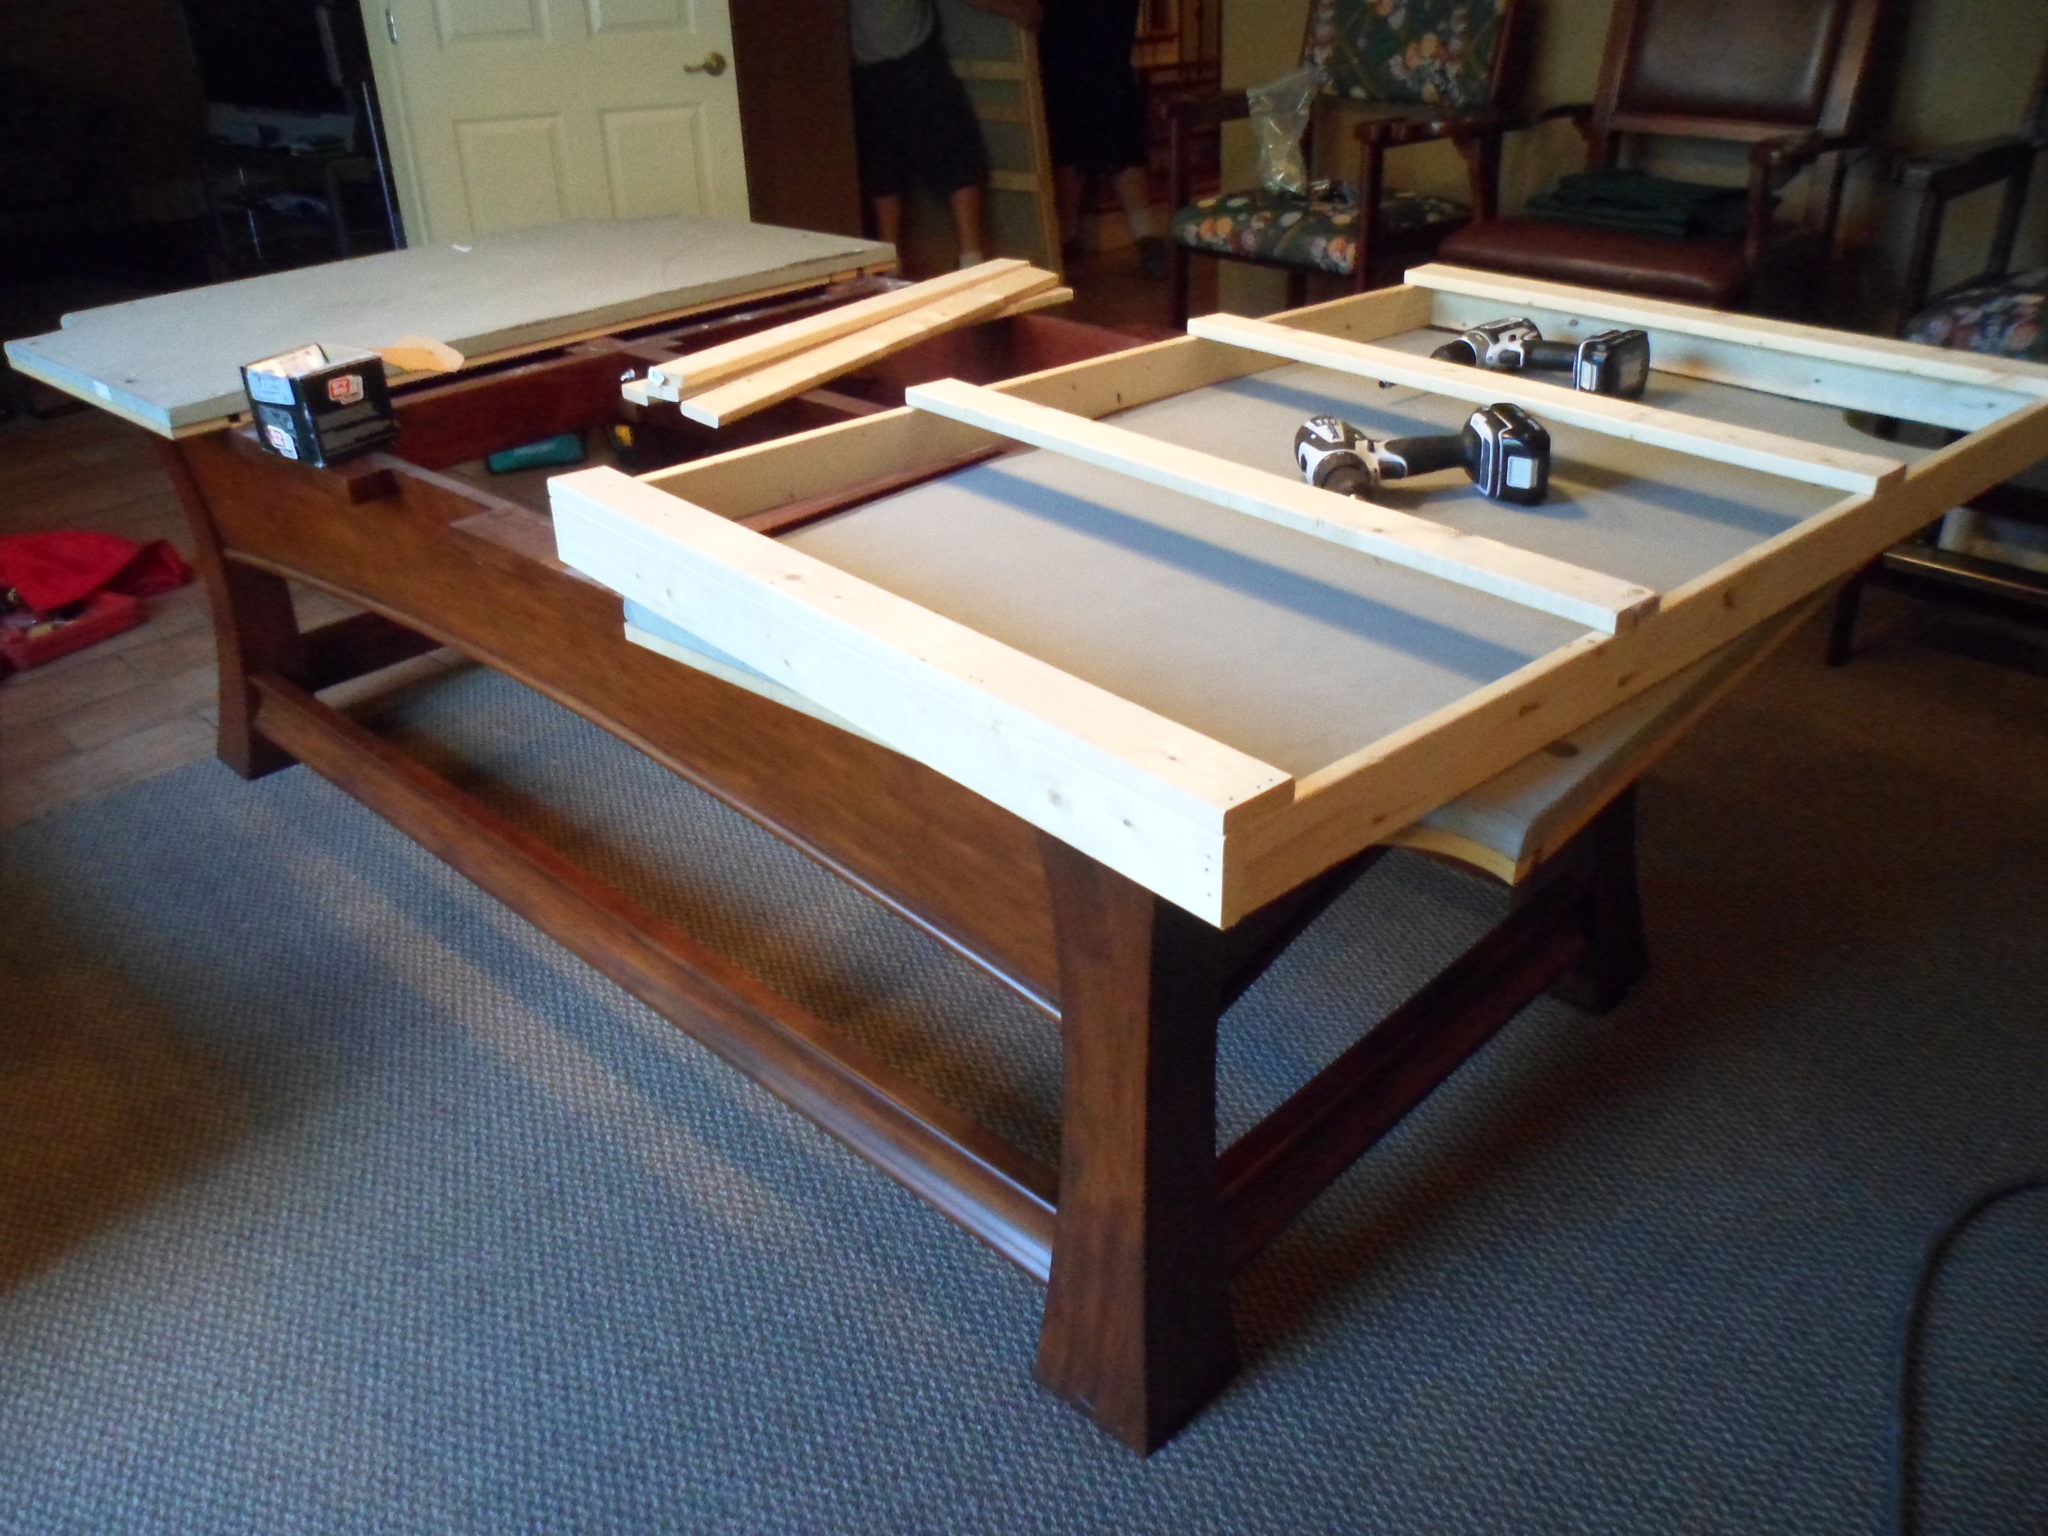 Disassembling A Pool Table In Atlanta Pool Table Disassembly 